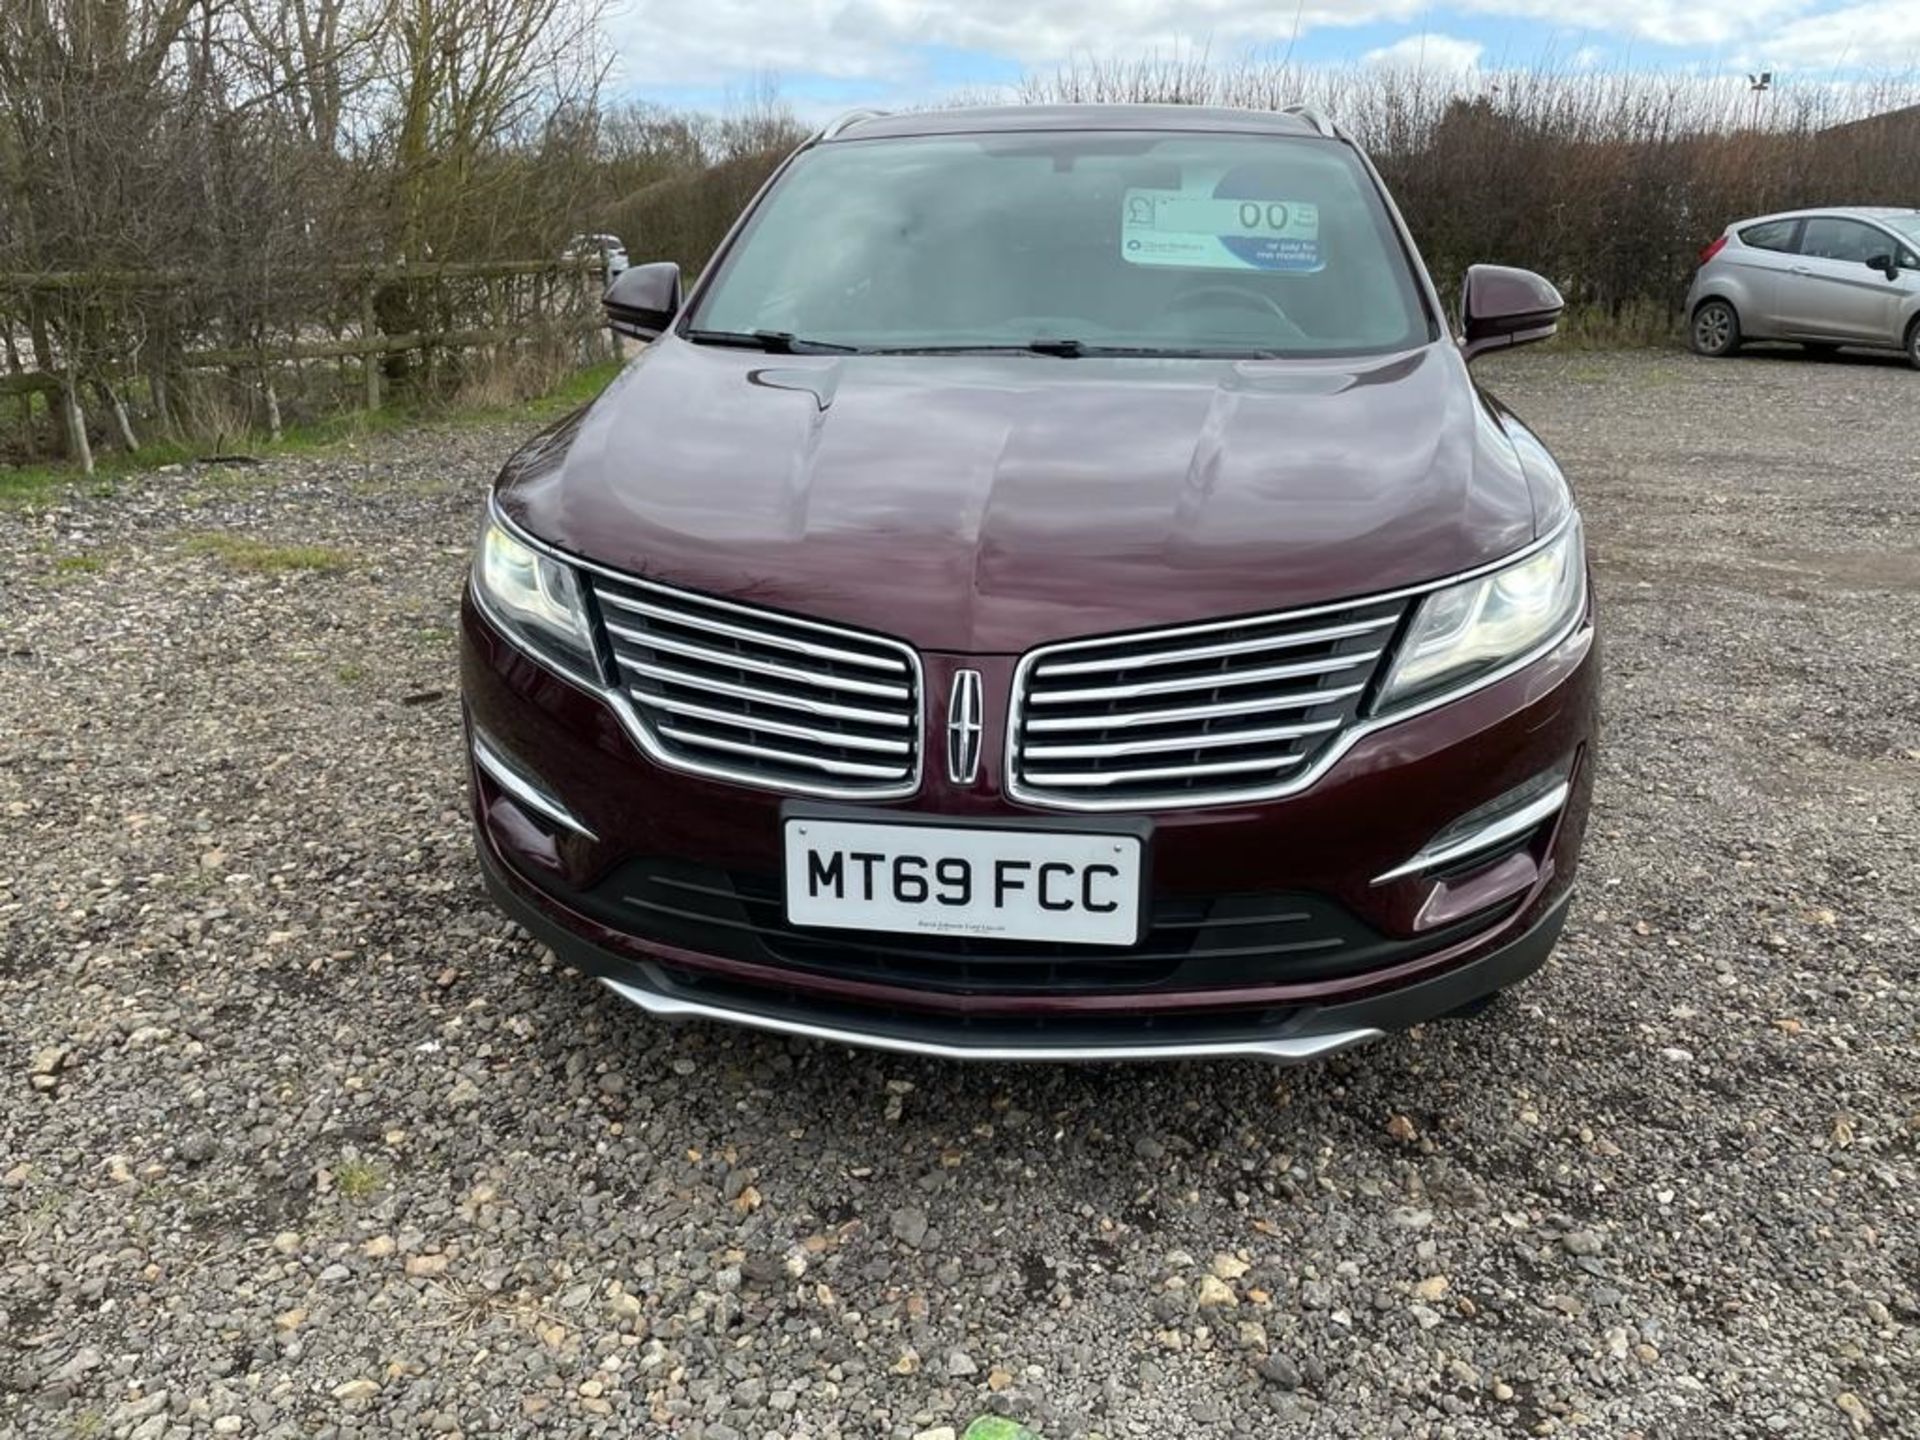 69 PLATE, PRE-REGISTERED 2017MY, LINCOLN MKC PREMIER 2.0L TURBO PETROL ECOBOOST (200bhp) AUTOMATIC - Image 2 of 14